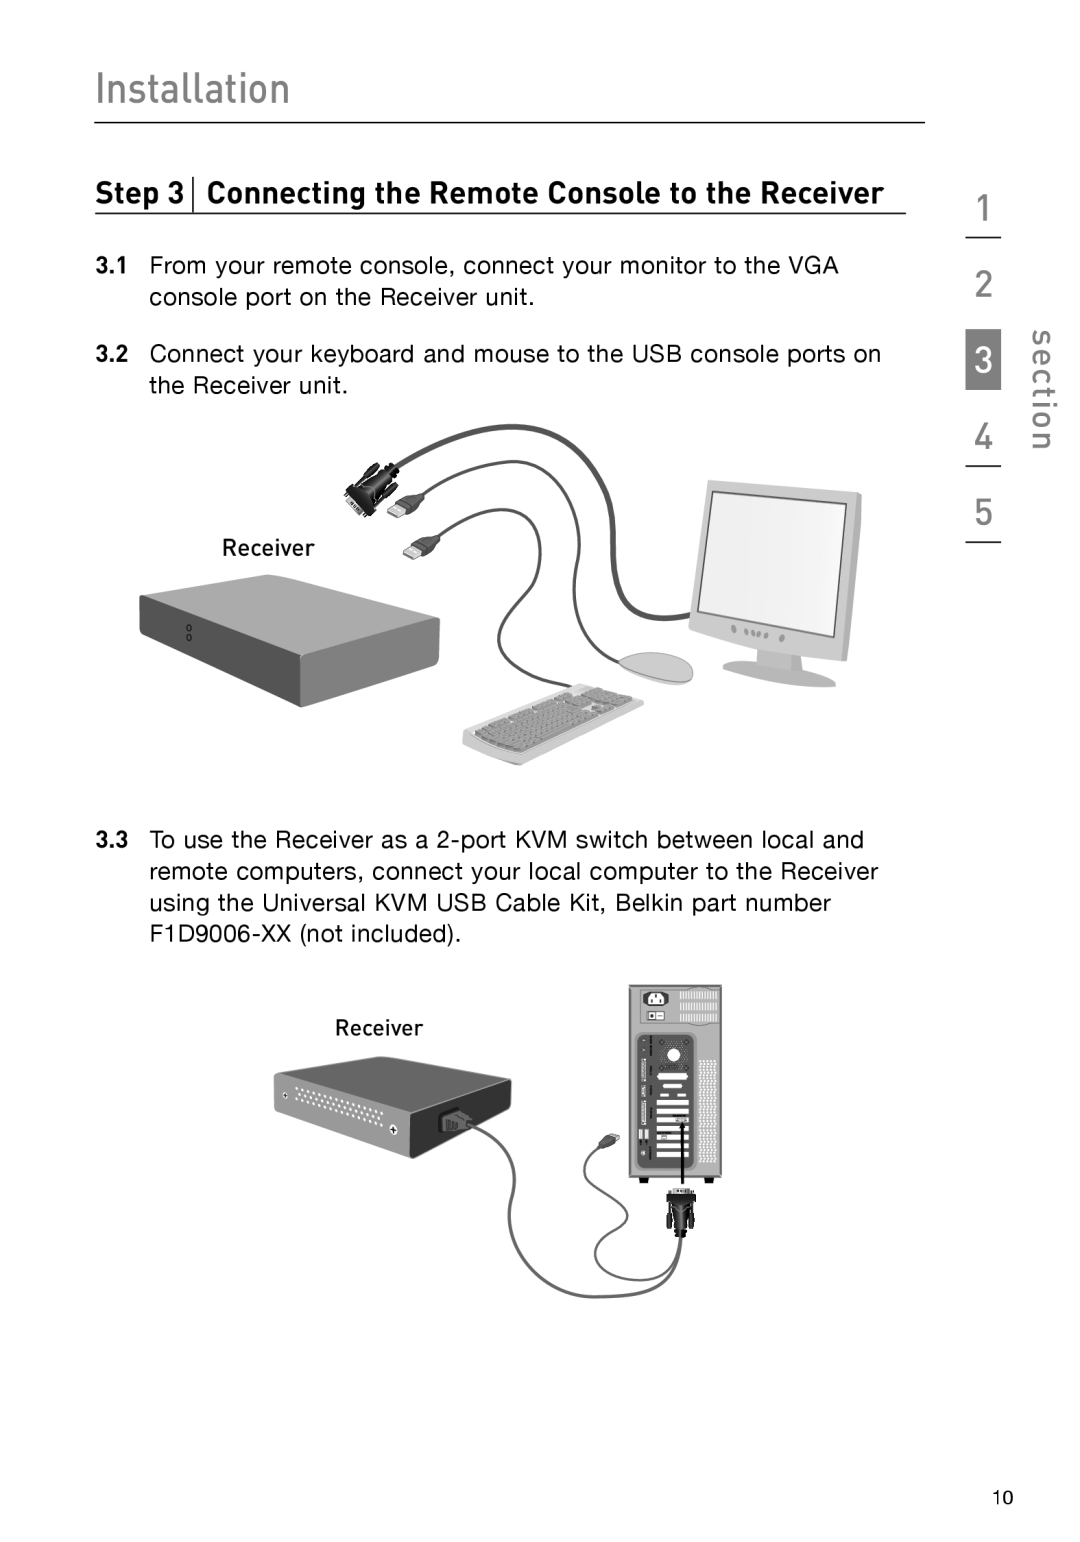 Belkin P75472-A manual Connecting the Remote Console to the Receiver, Installation, section 